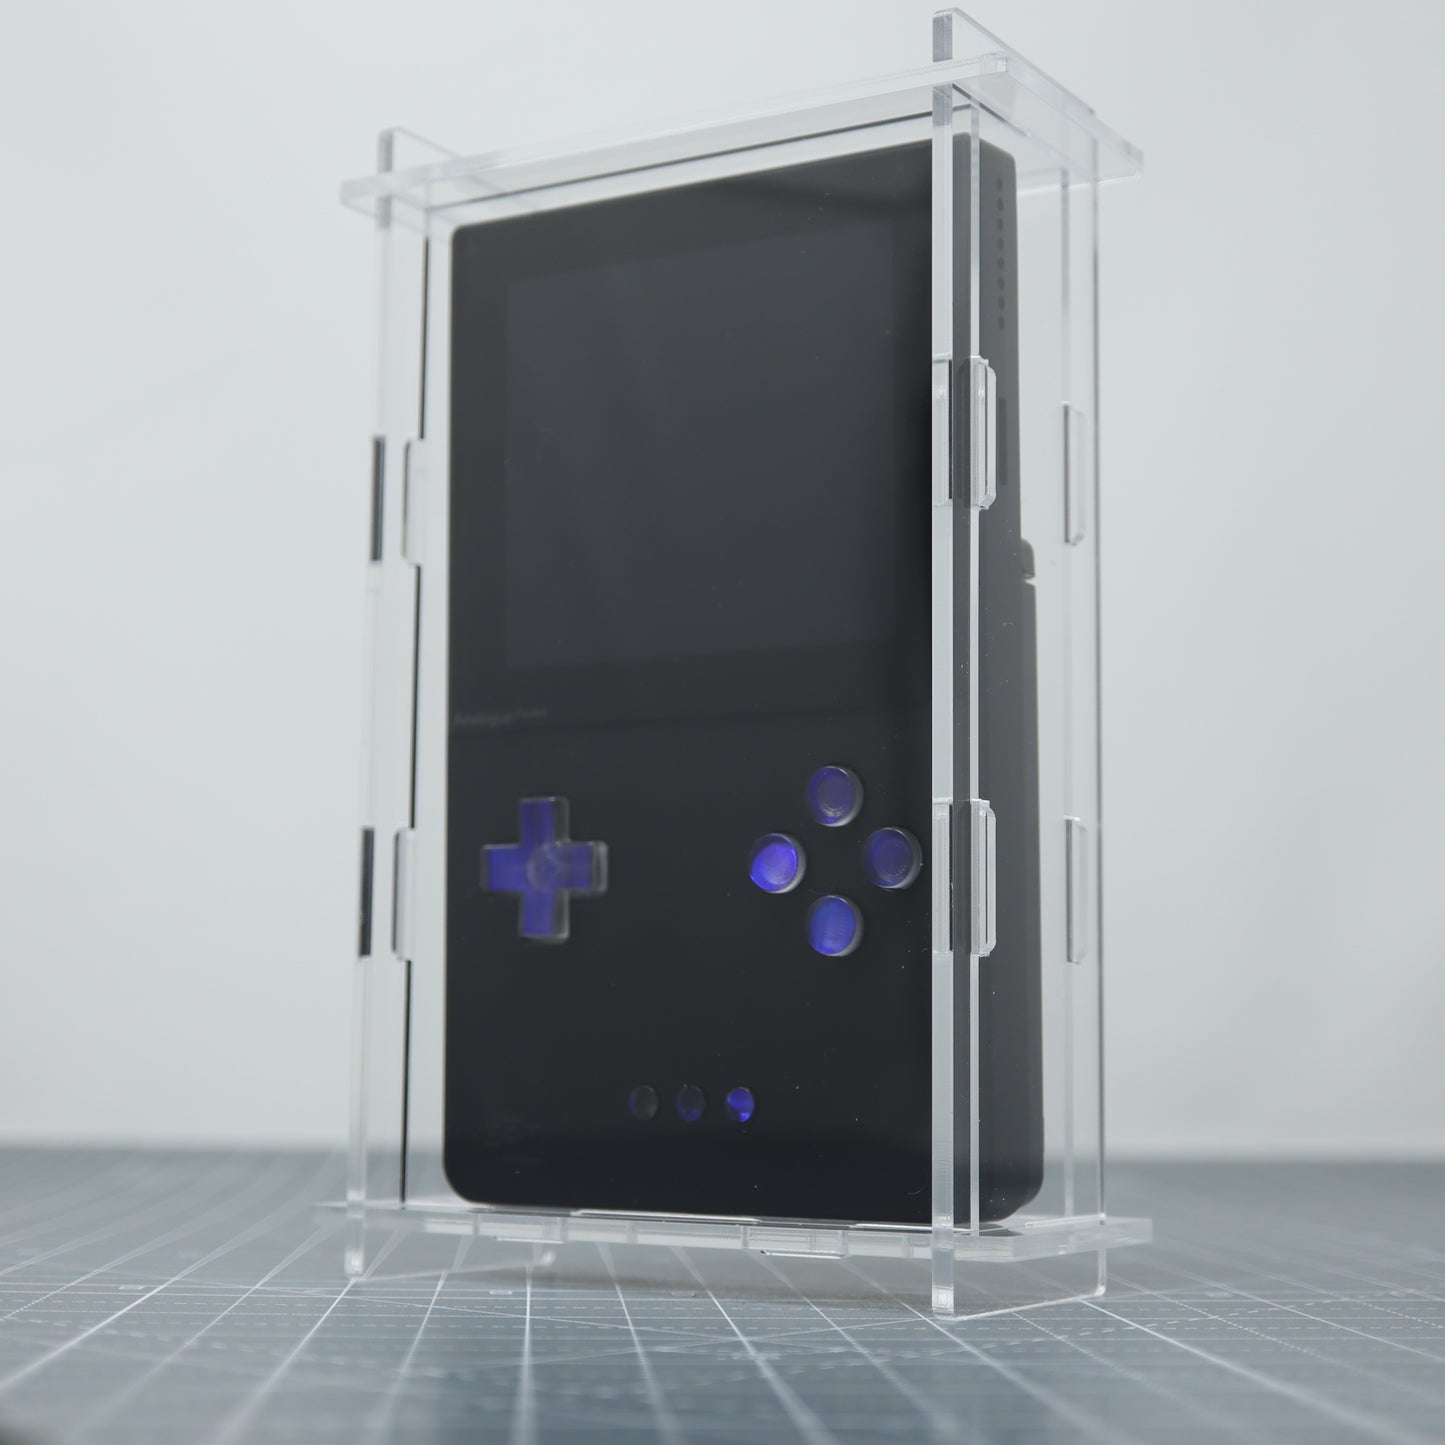 Analogue Pocket Loose Console - Display Capsule